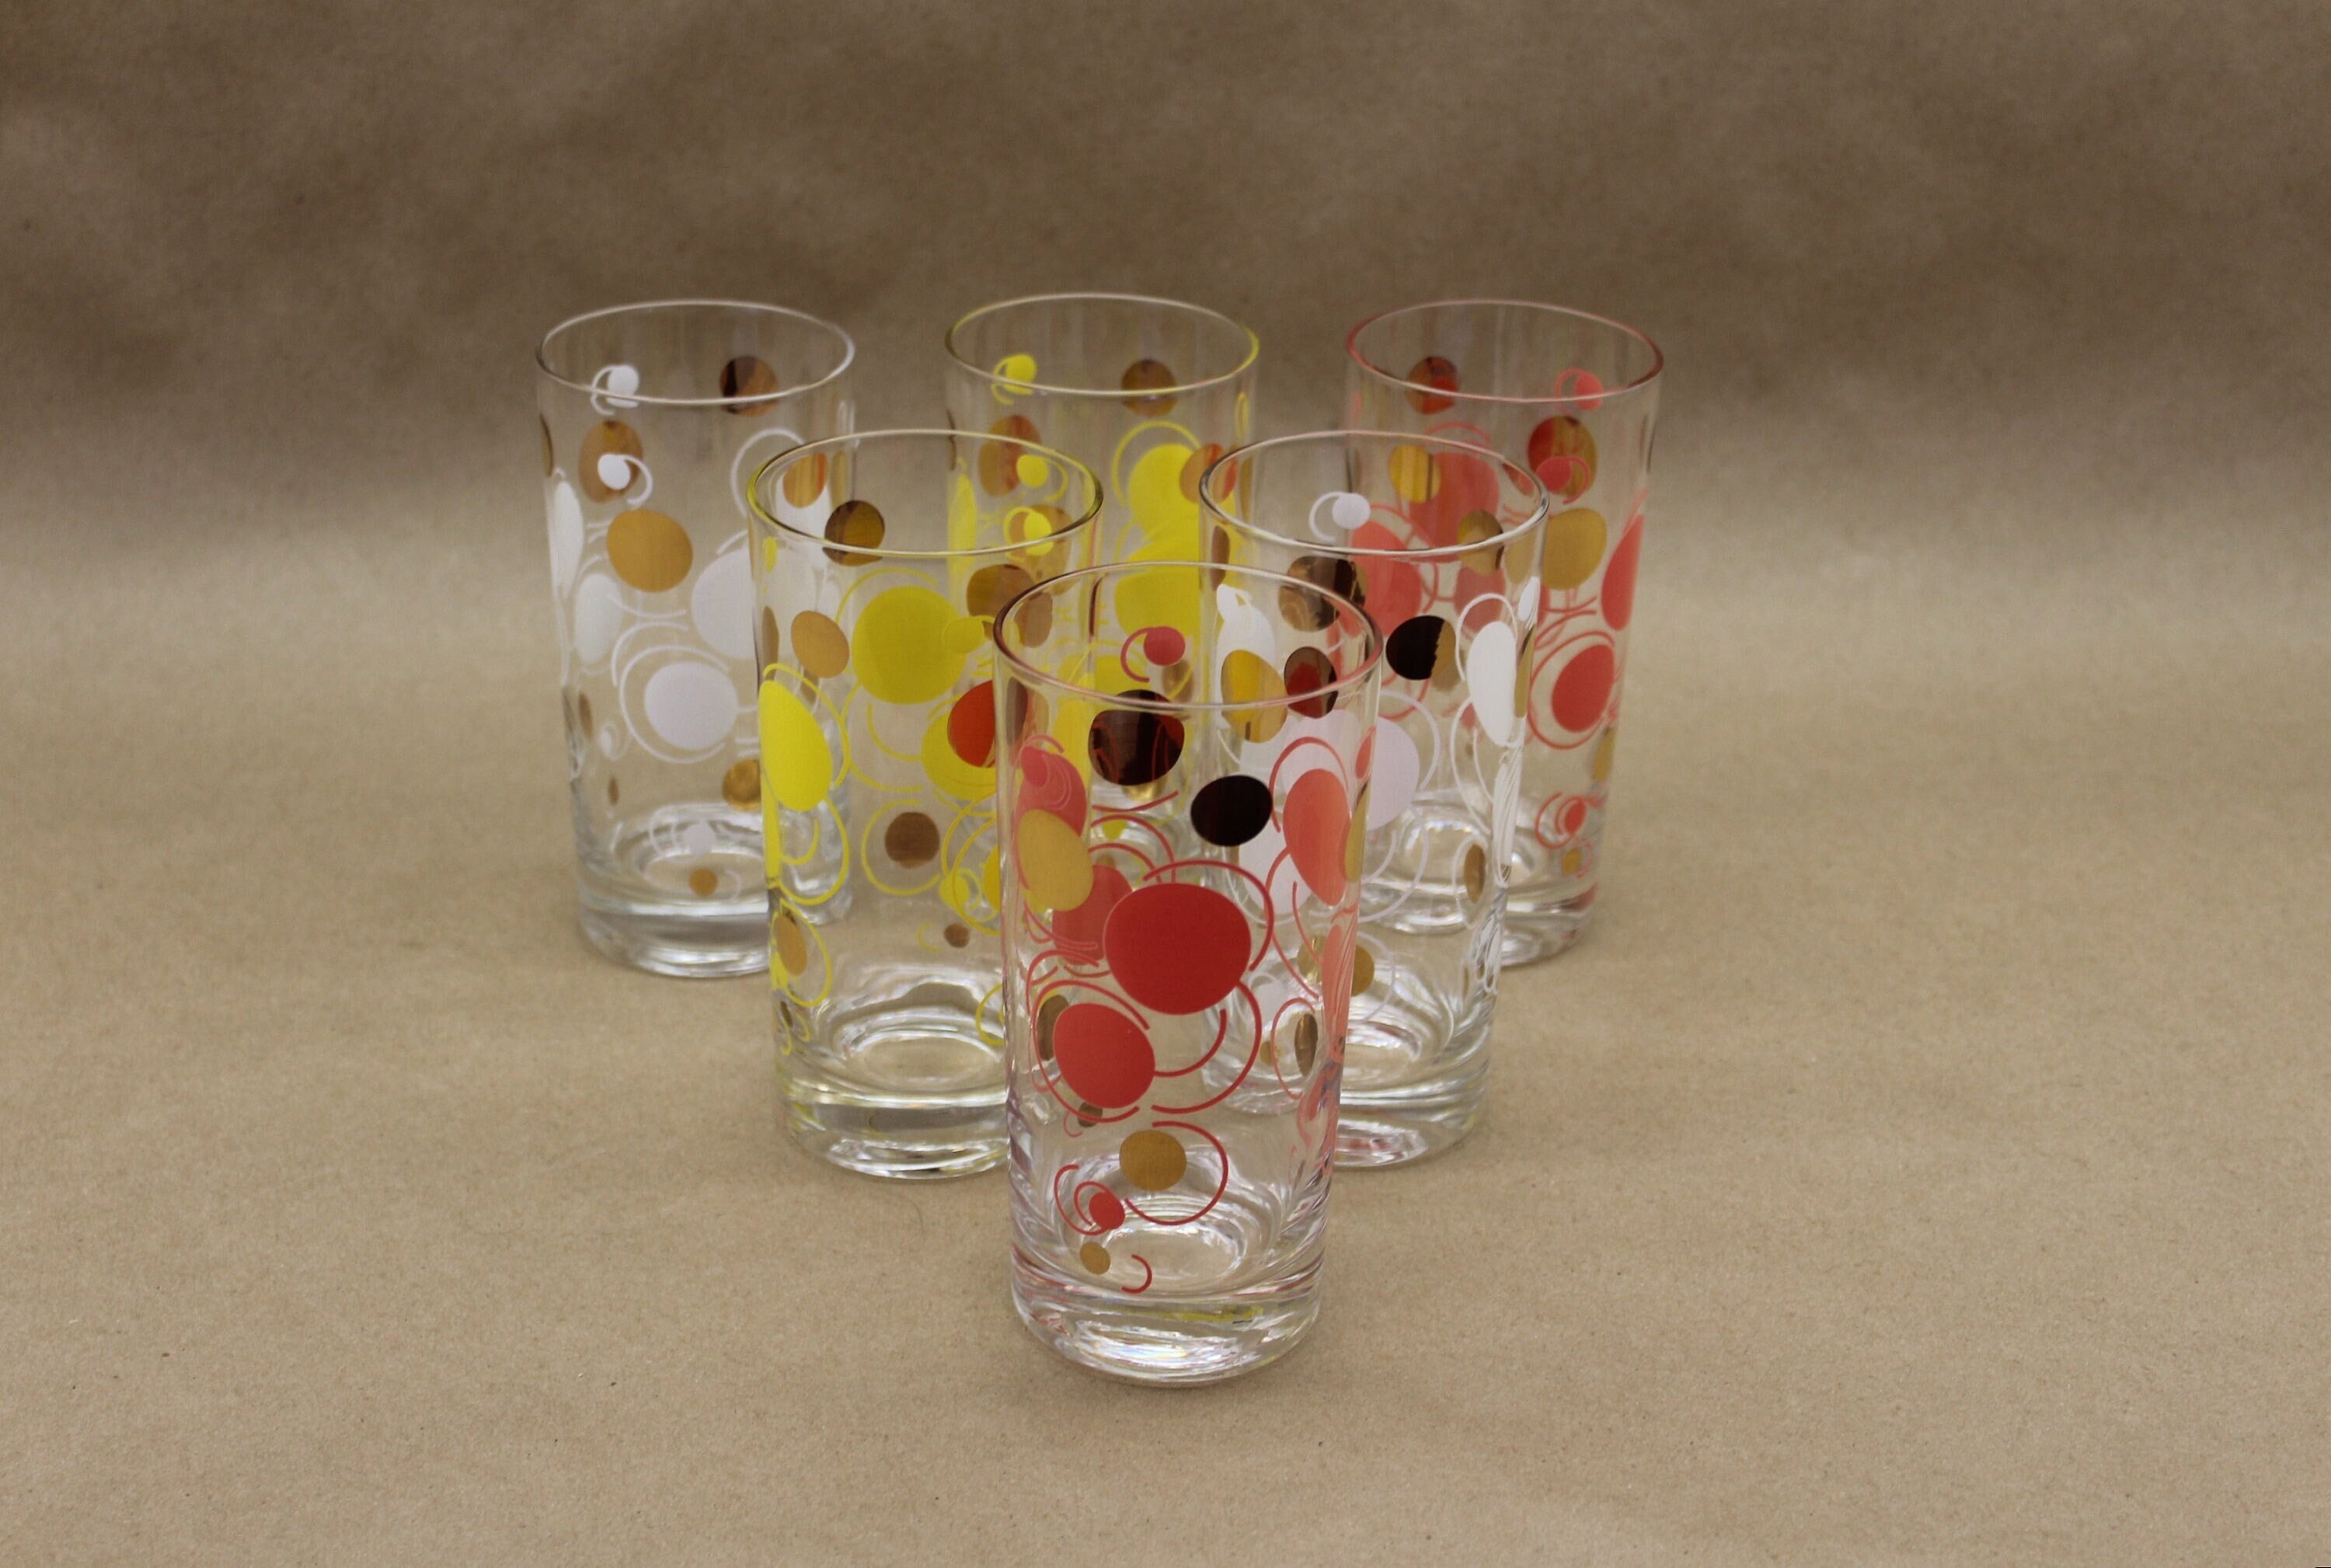 Libbey Carolina Entertaining Set with 6 Goblet Glasses and Pitcher